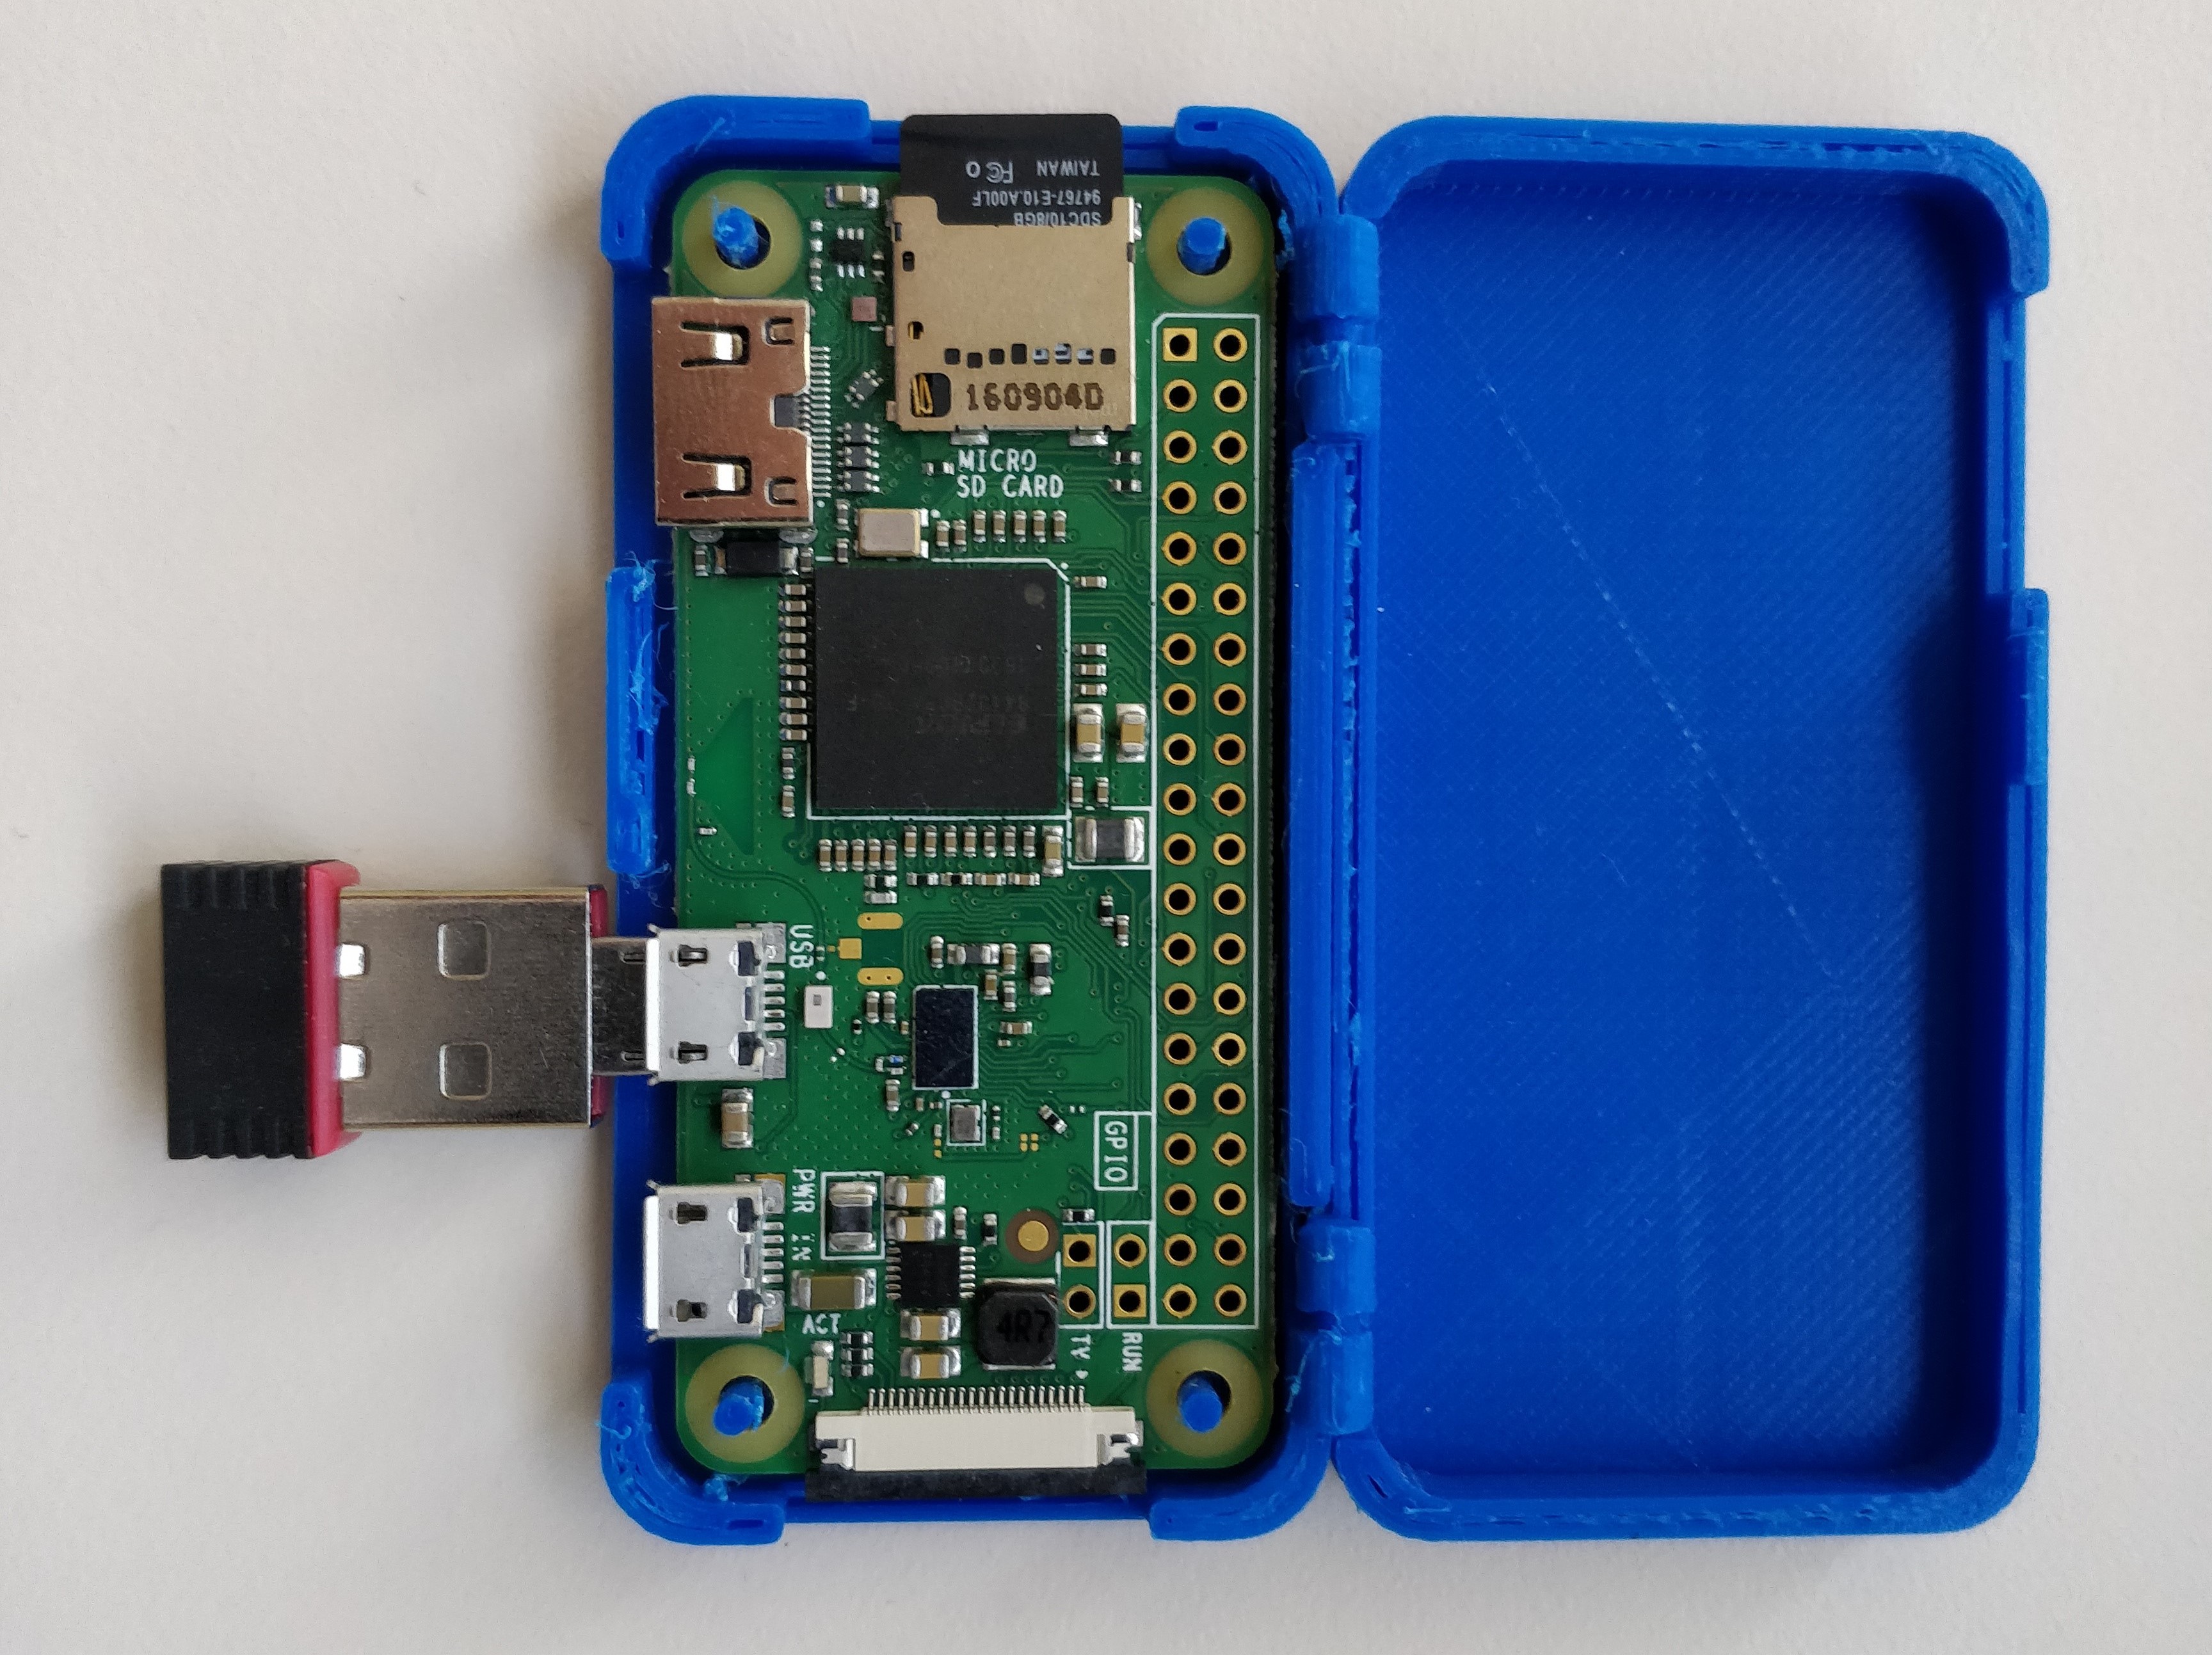 Blue box open with Raspberry Pi board exposed.